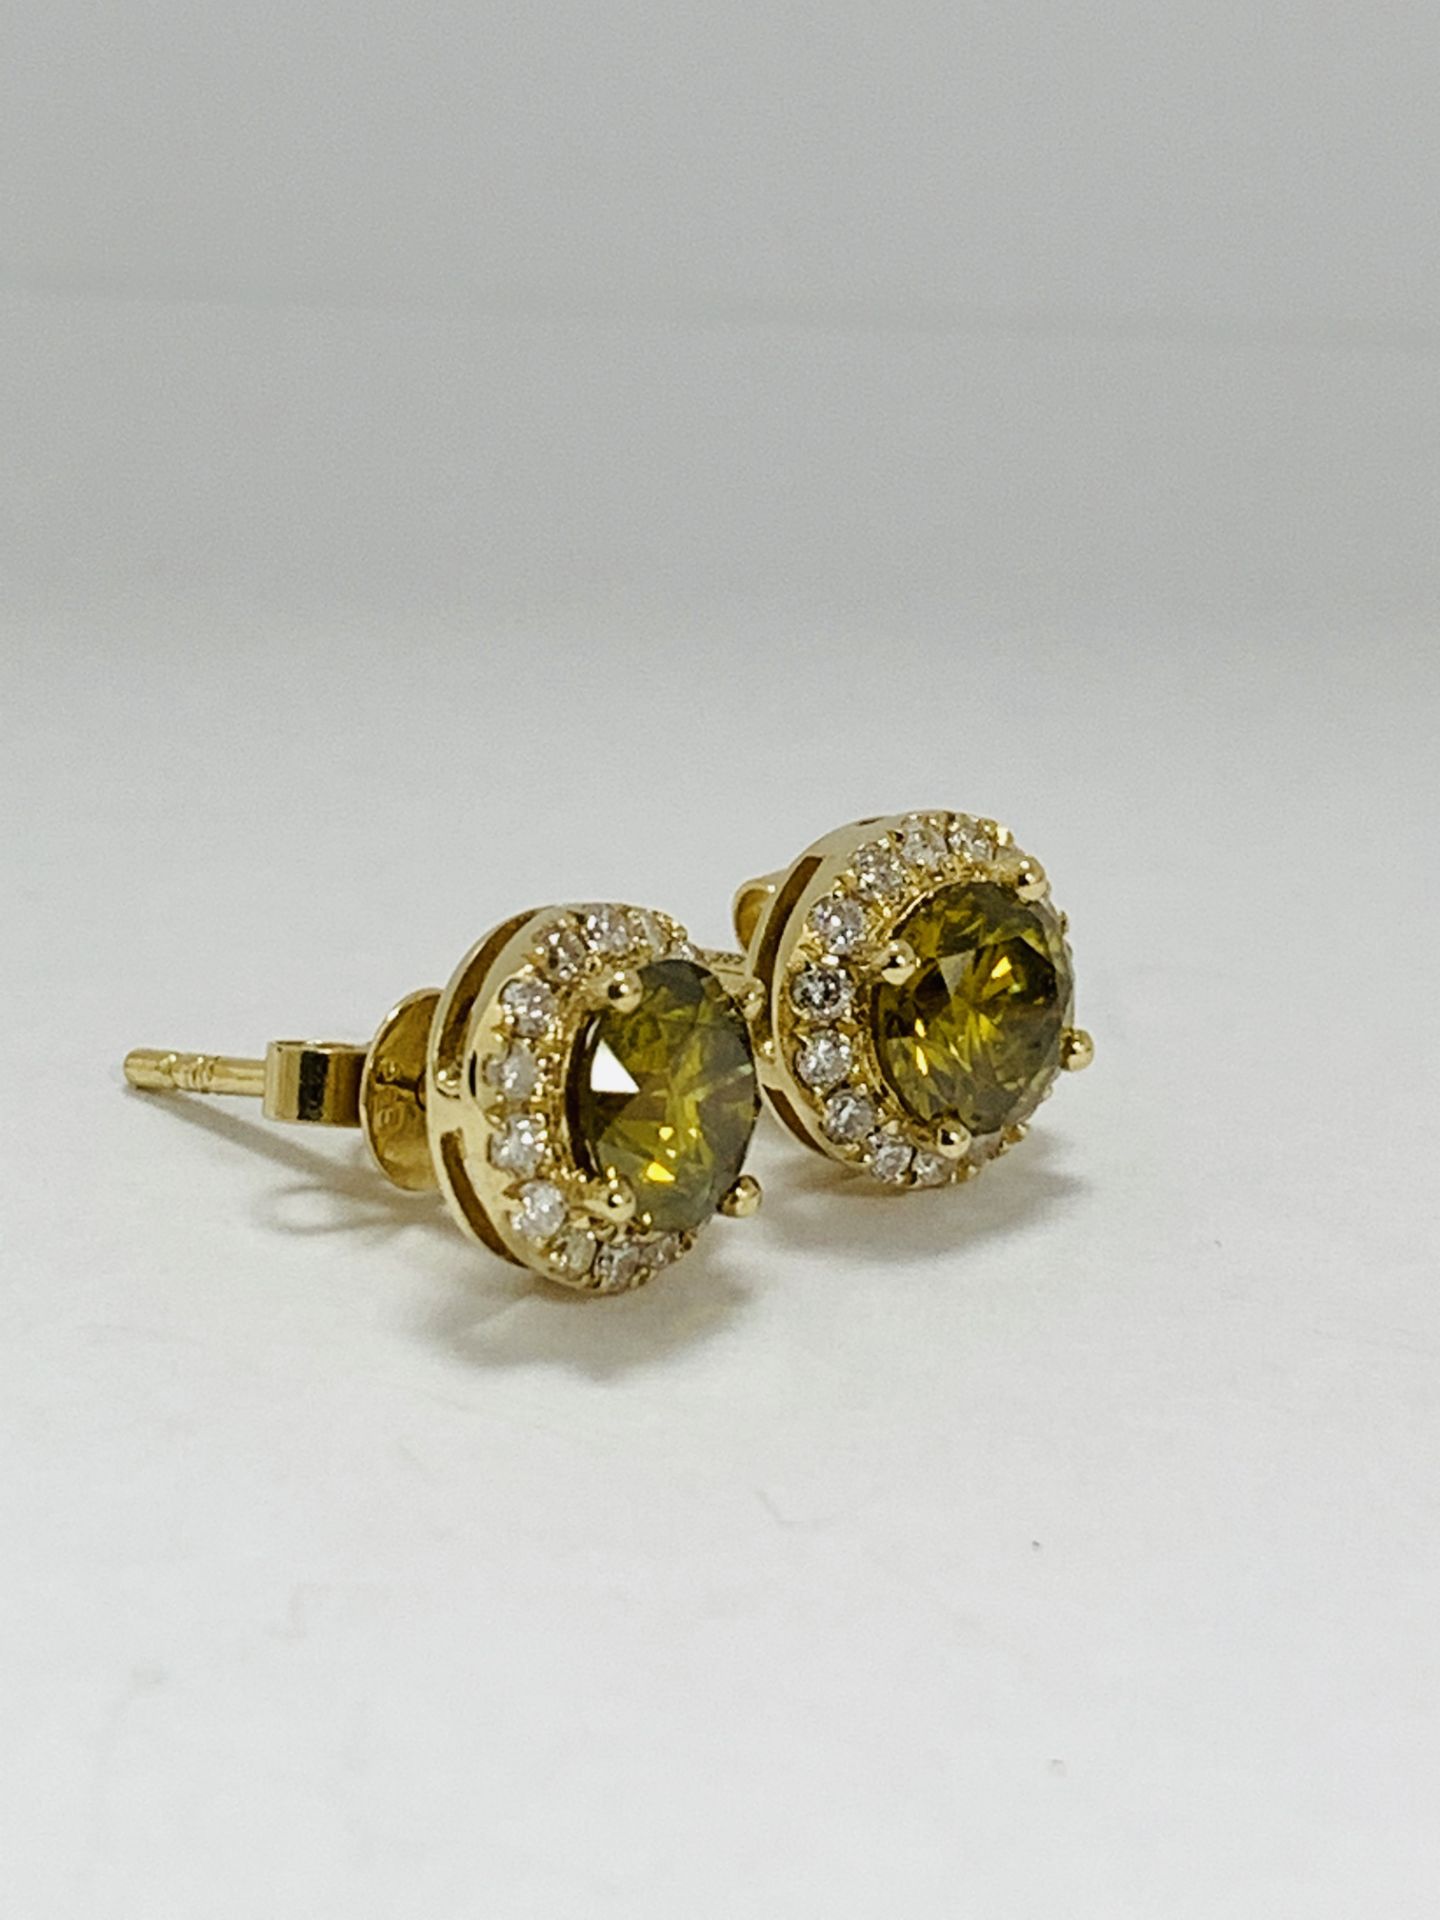 14K Yellow Gold Pair Of Earrings - Image 6 of 12